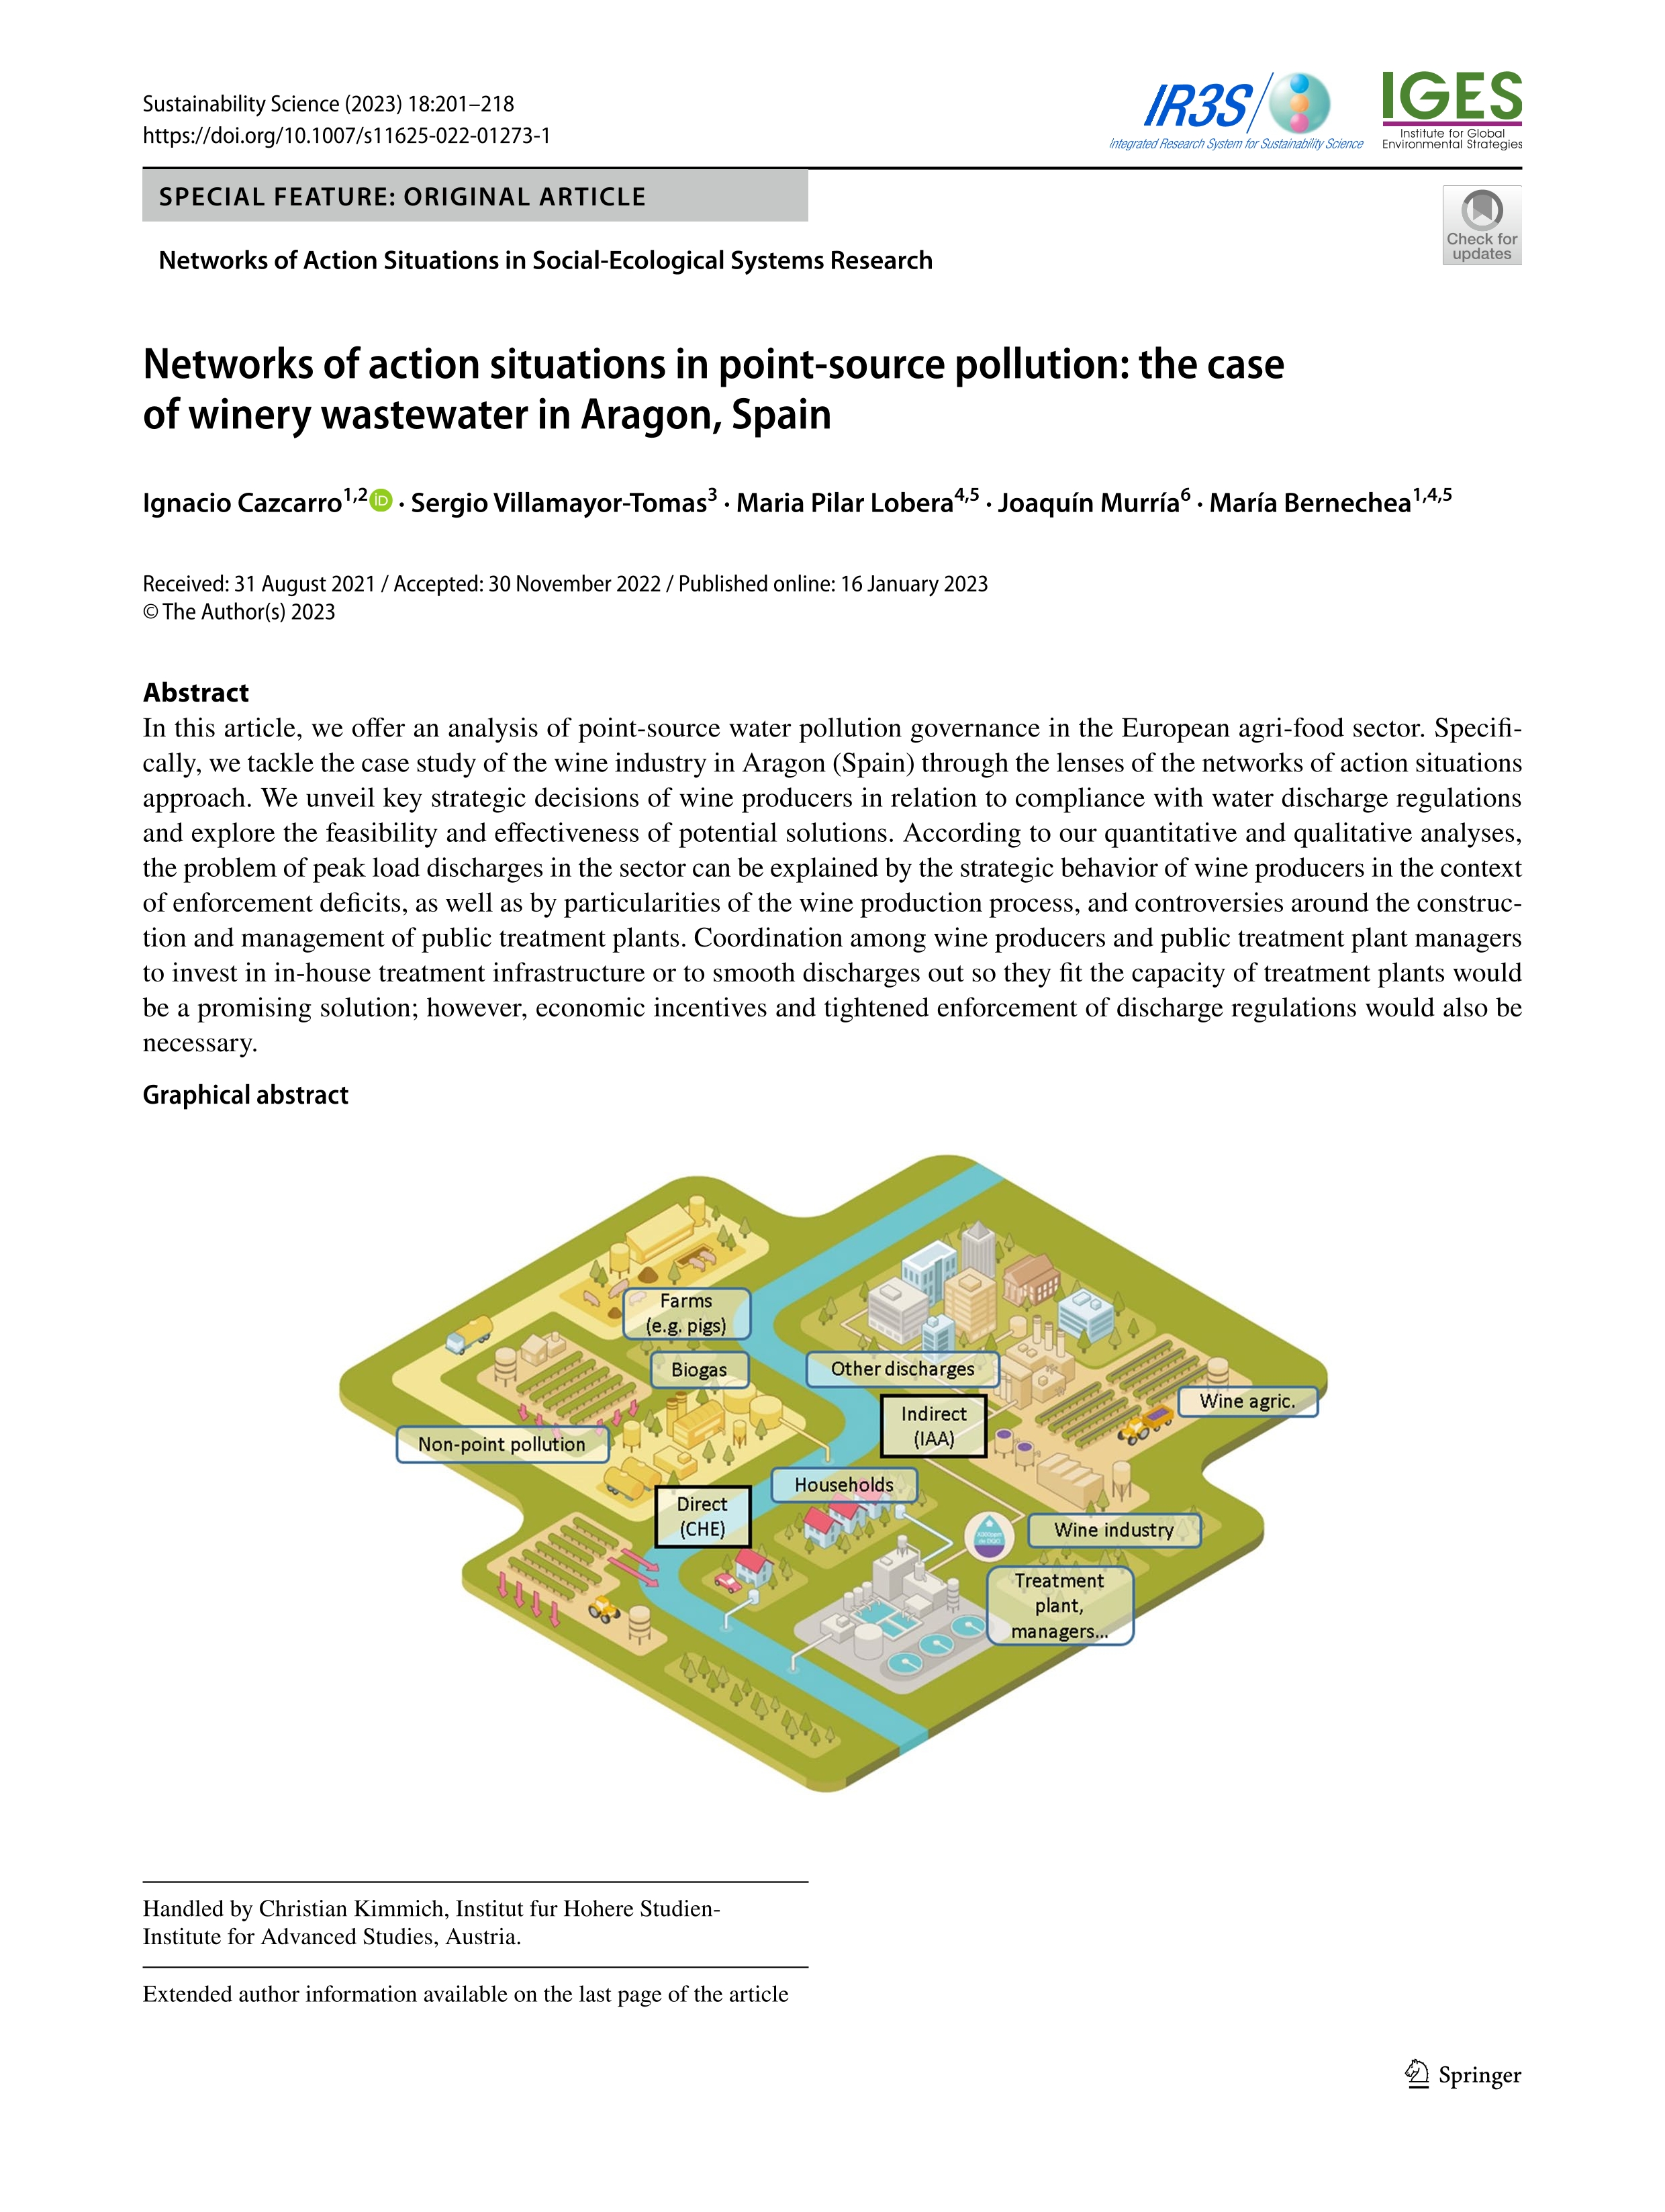 Networks of action situations in point-source pollution: the case of winery wastewater in Aragon, Spain